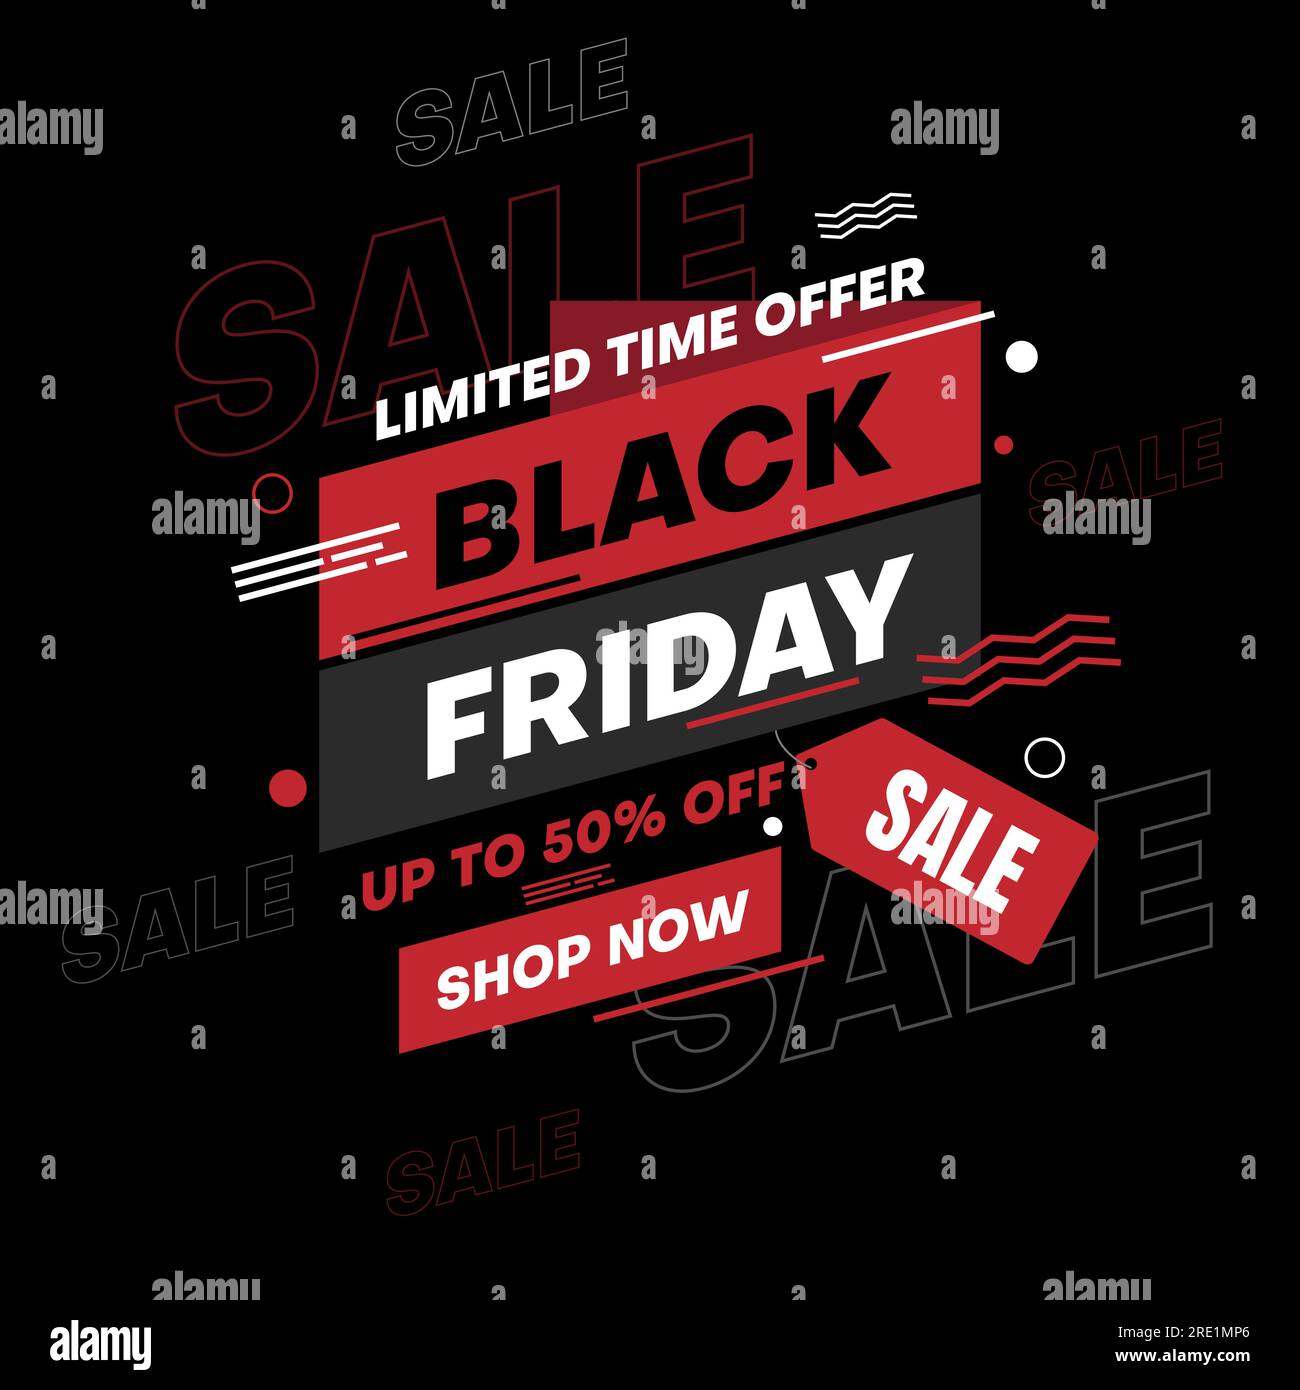 flat black friday sale banner design in red and black color Stock Vector